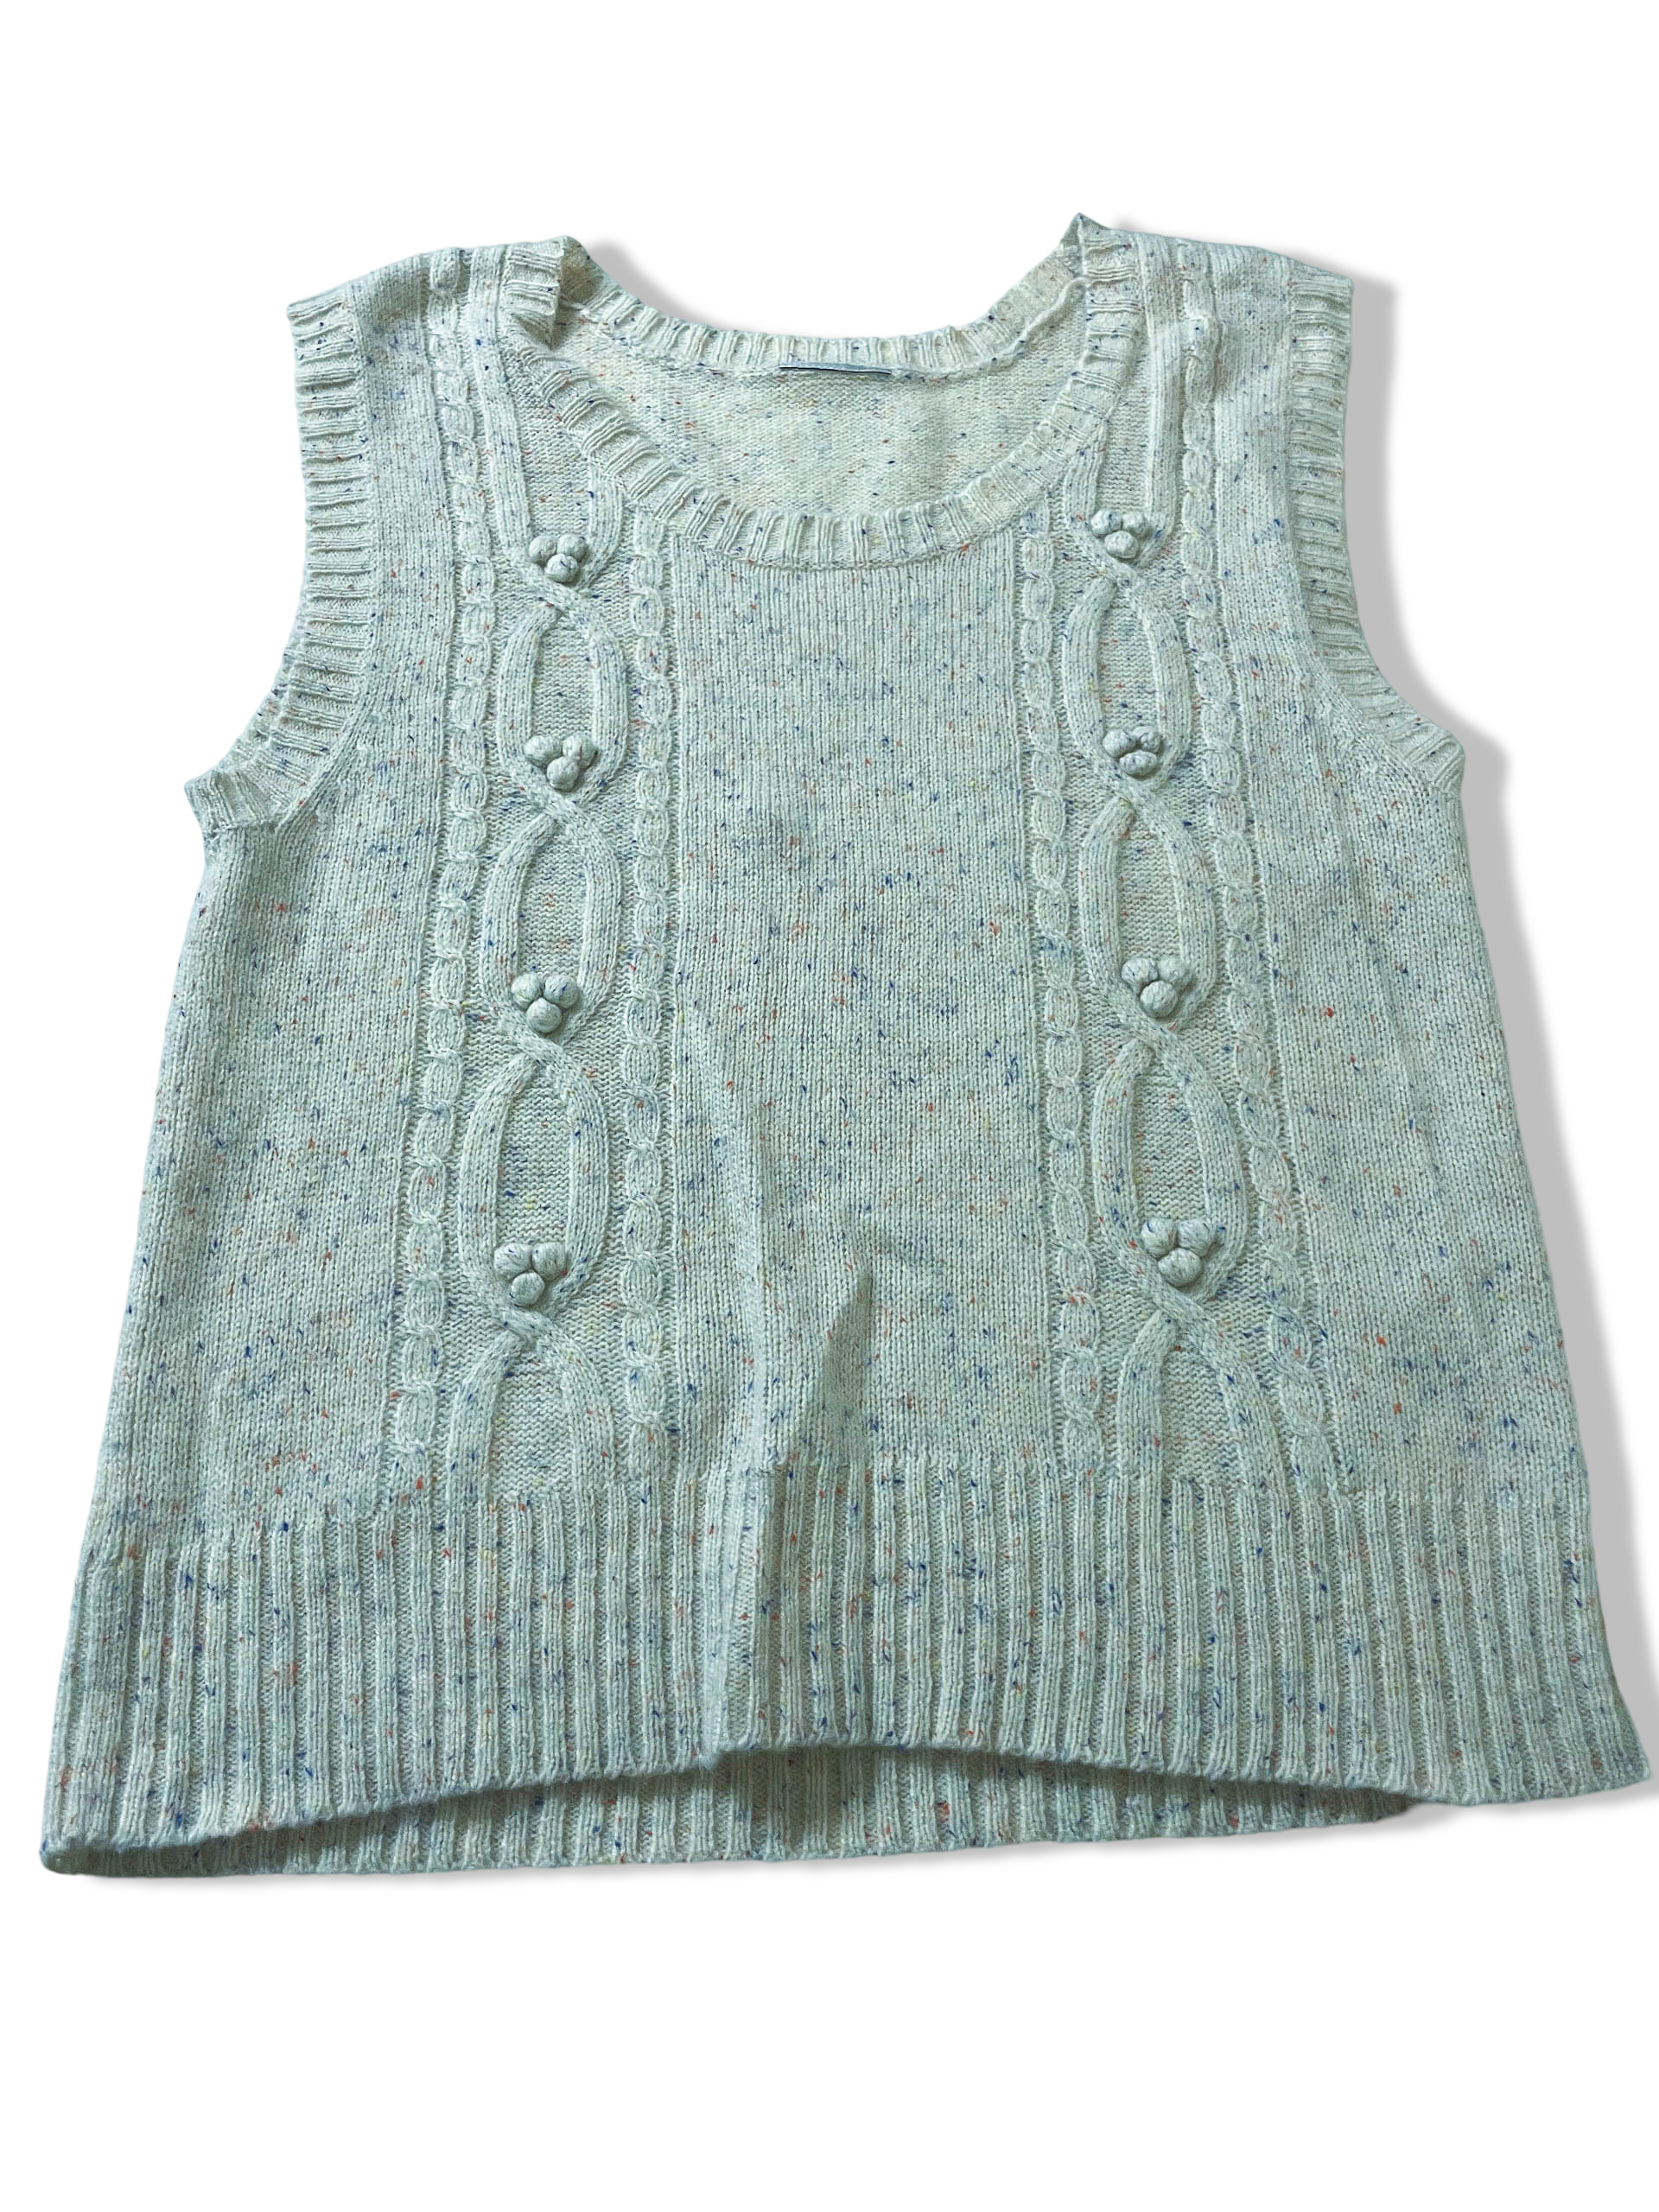 Vintage Cream women's cable knitted crew neck sleeveless sweater UK 14/16L22W17|SKU 3970